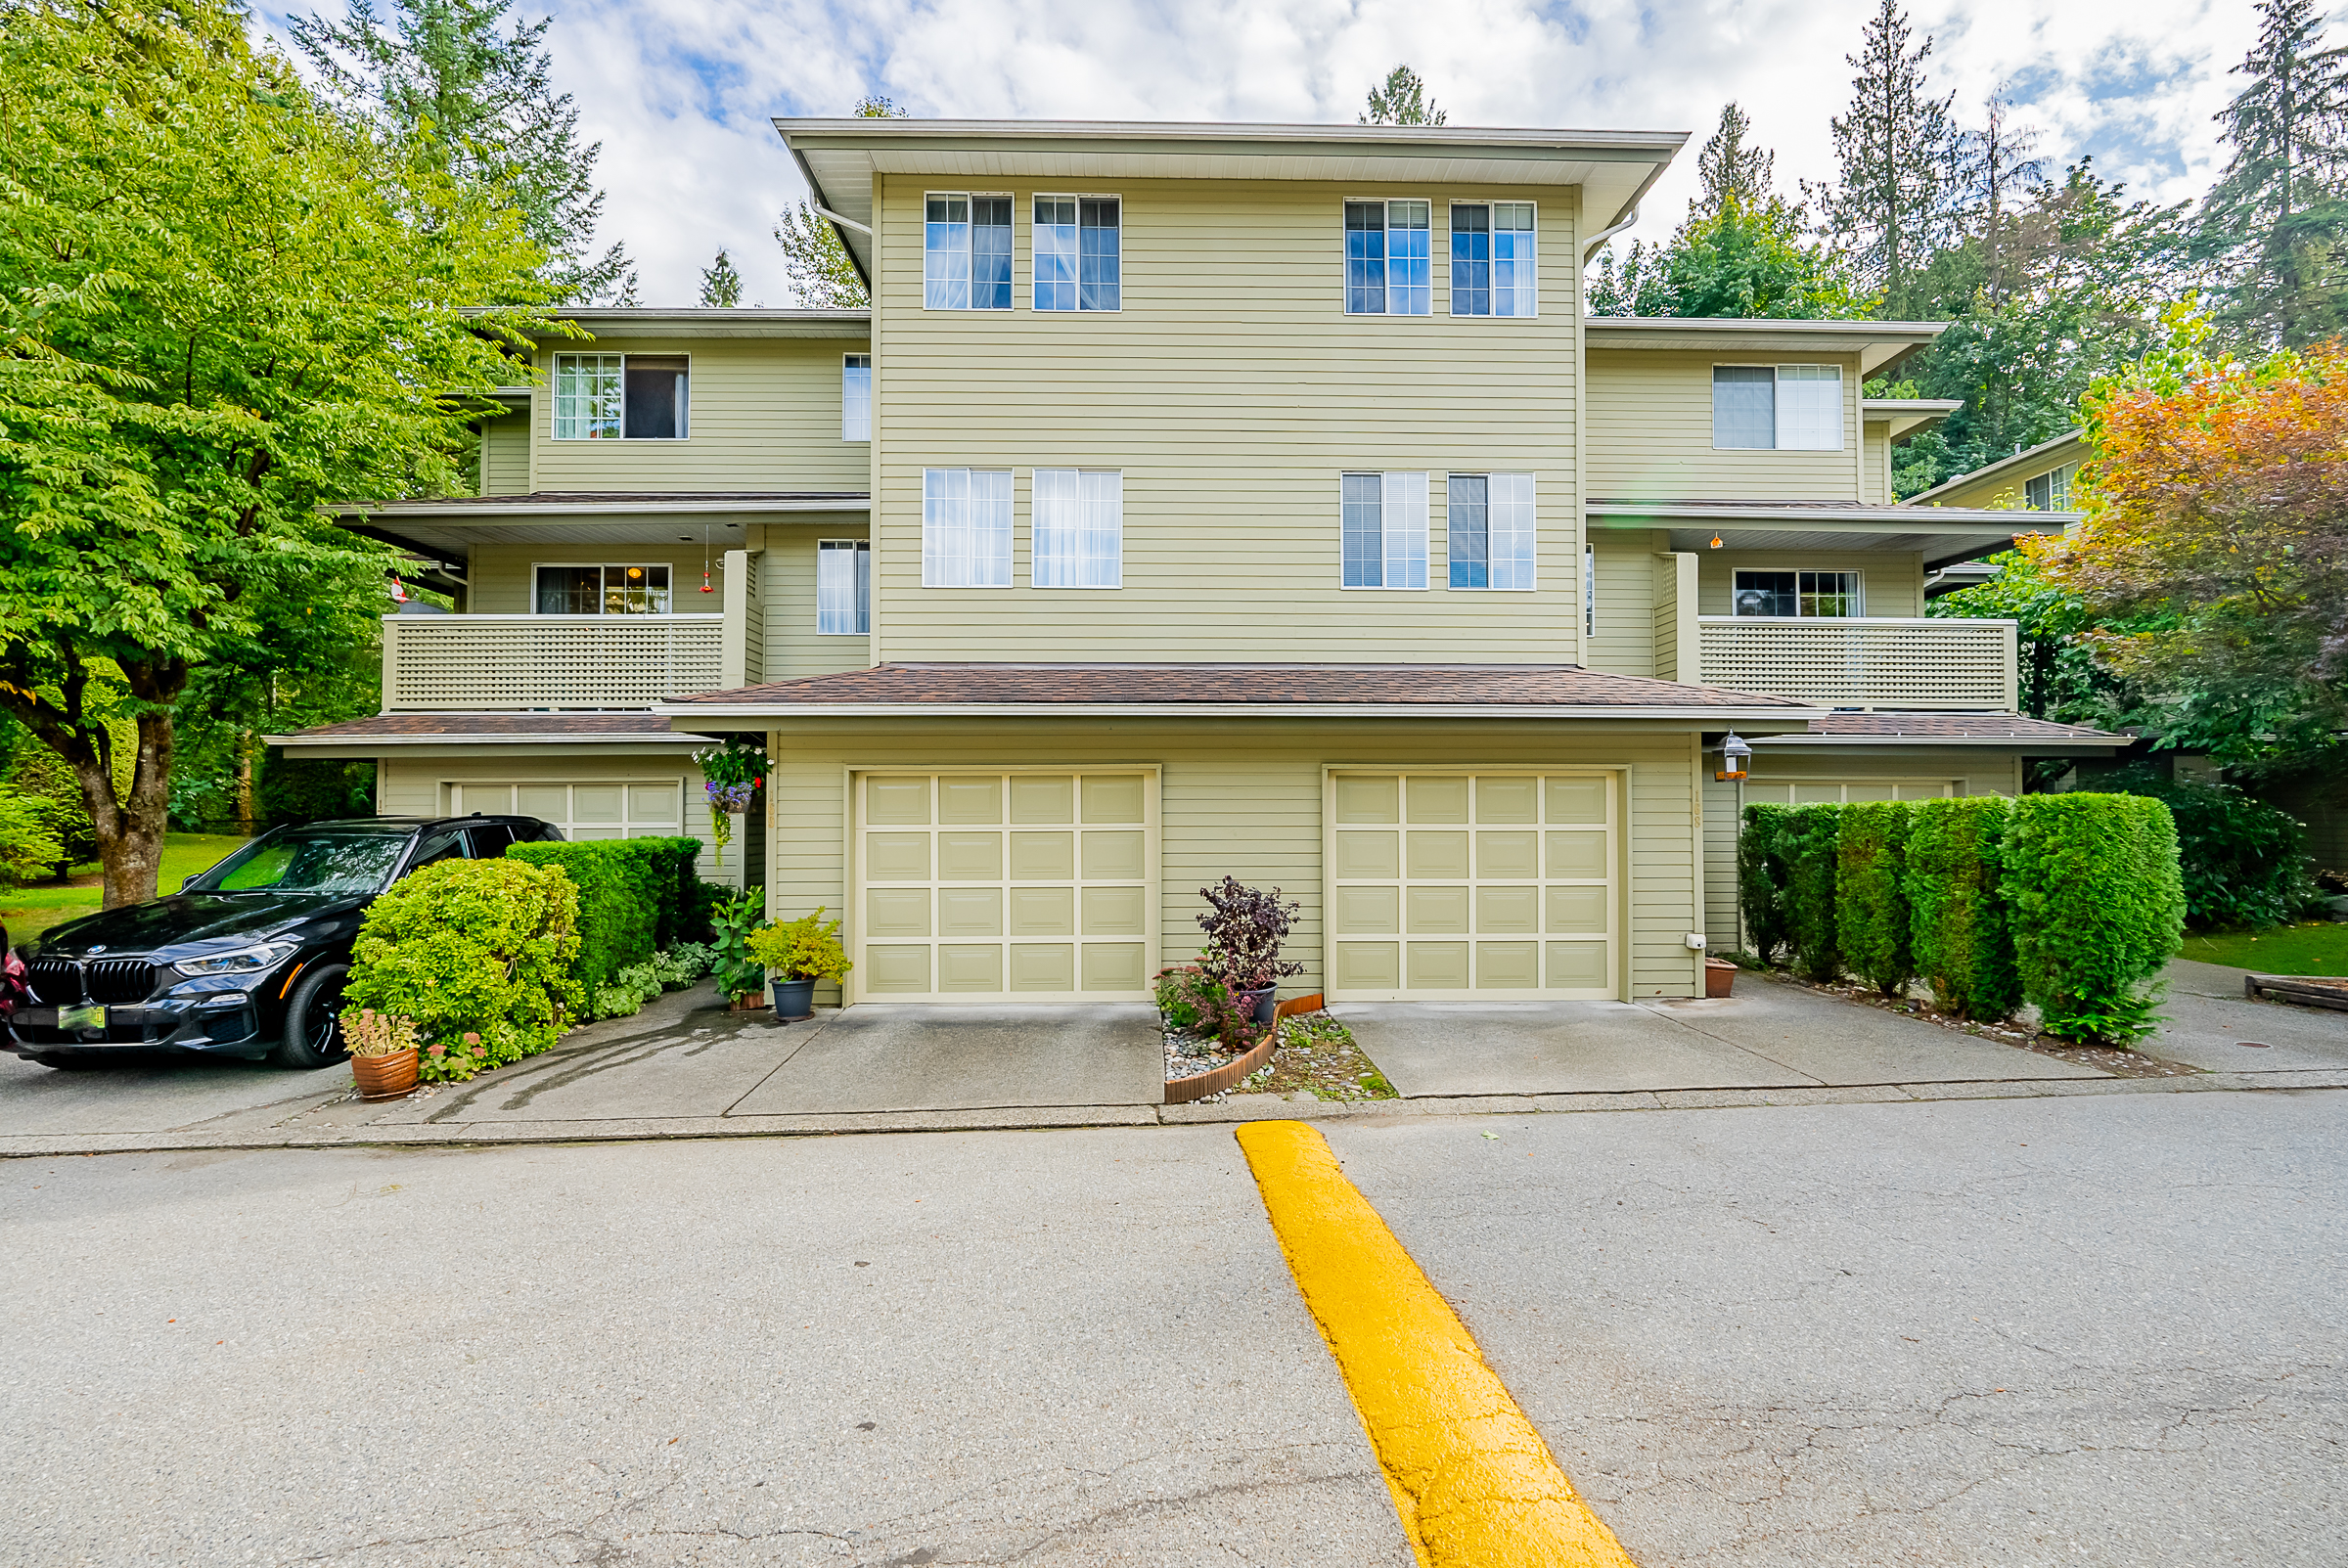 Unit 170 1386 Lincoln Avenue Coquitlam Townhome Listing For Sale Krista Lapp-2